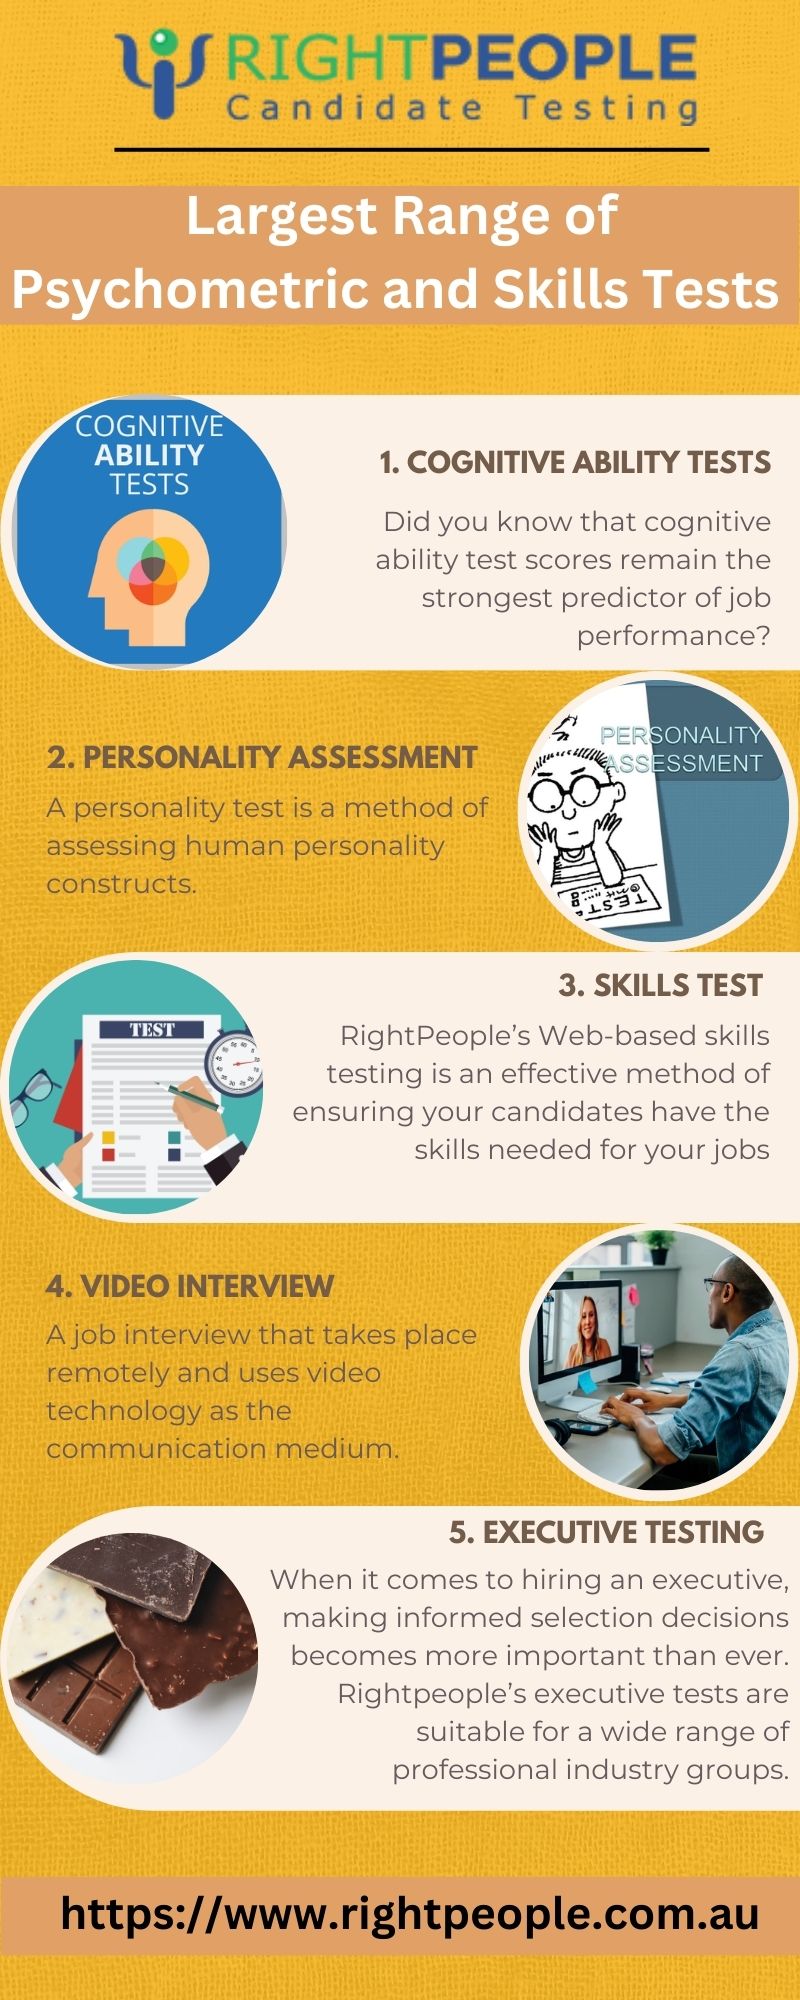 Largest Range of Psychometric and Skills Tests.jpg | Pearltrees